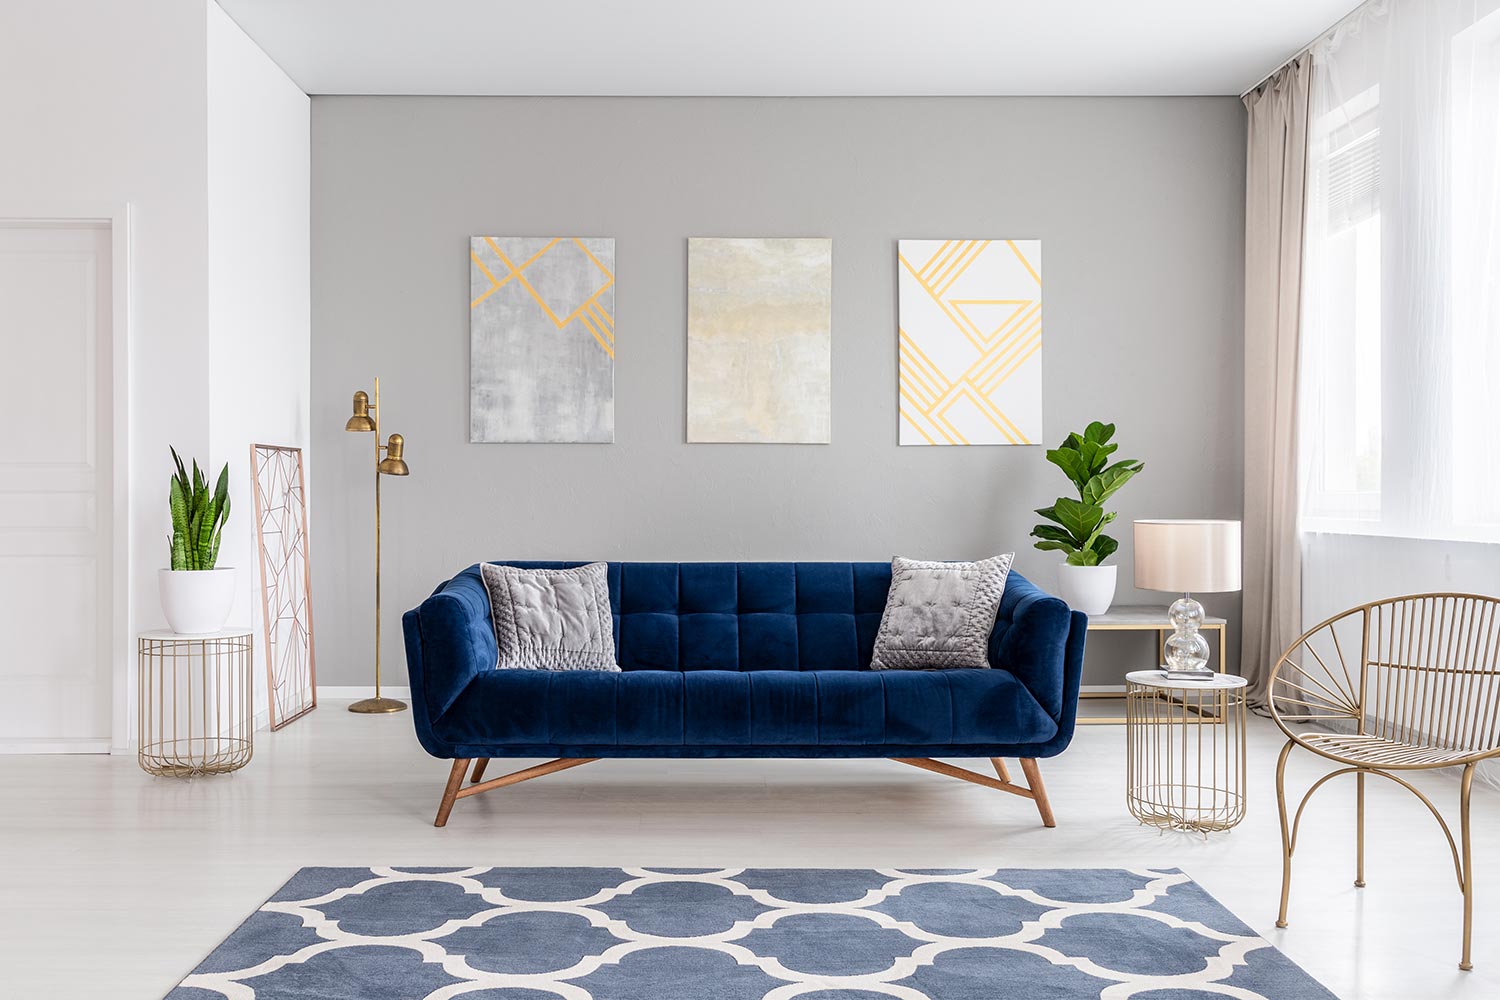 An elegant navy blue sofa in the middle of a bright living room interior